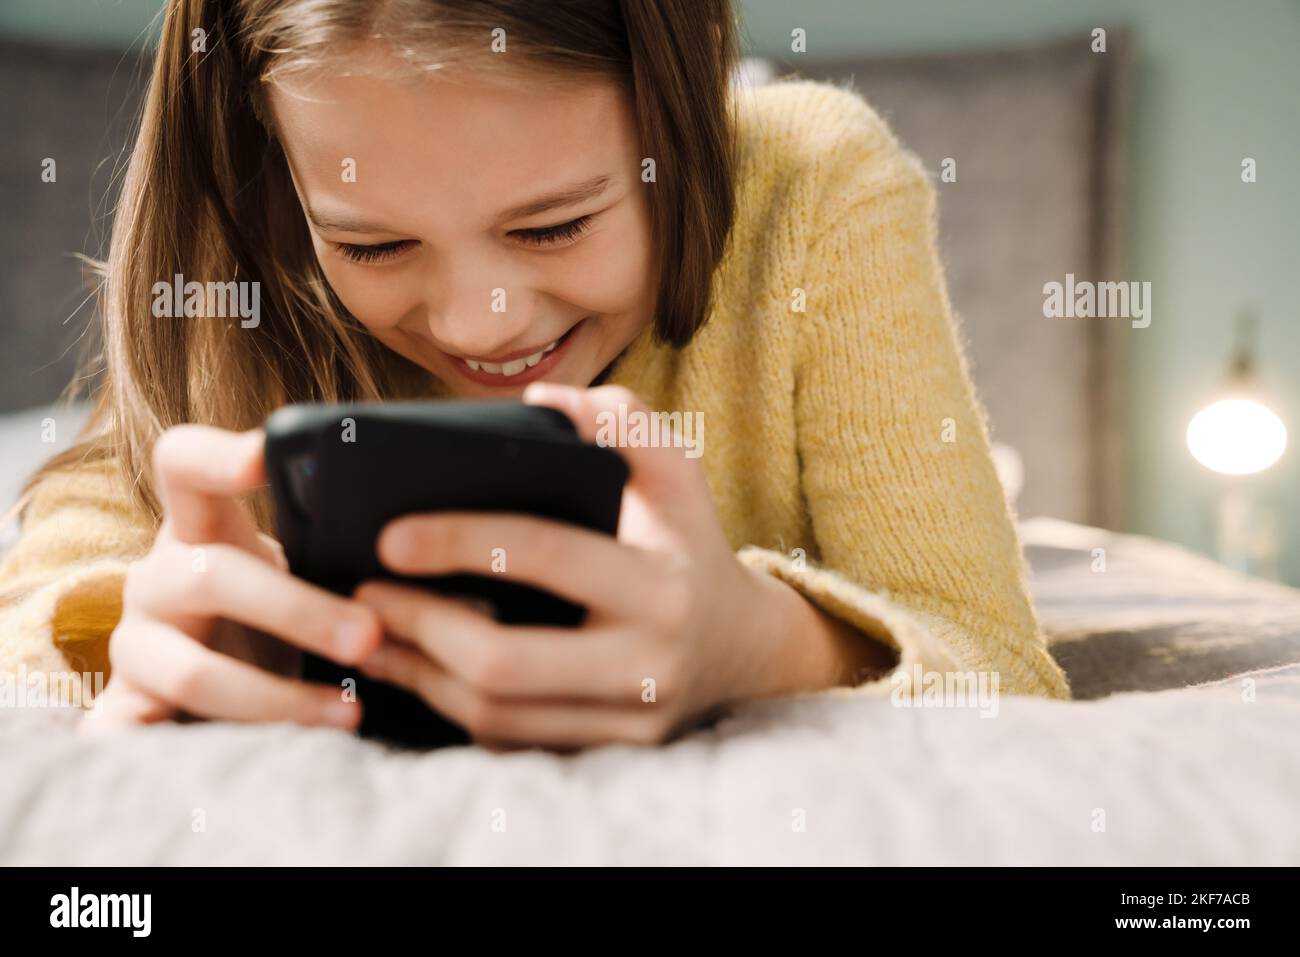 White happy girl using mobile phone while lying on bed at home Stock Photo